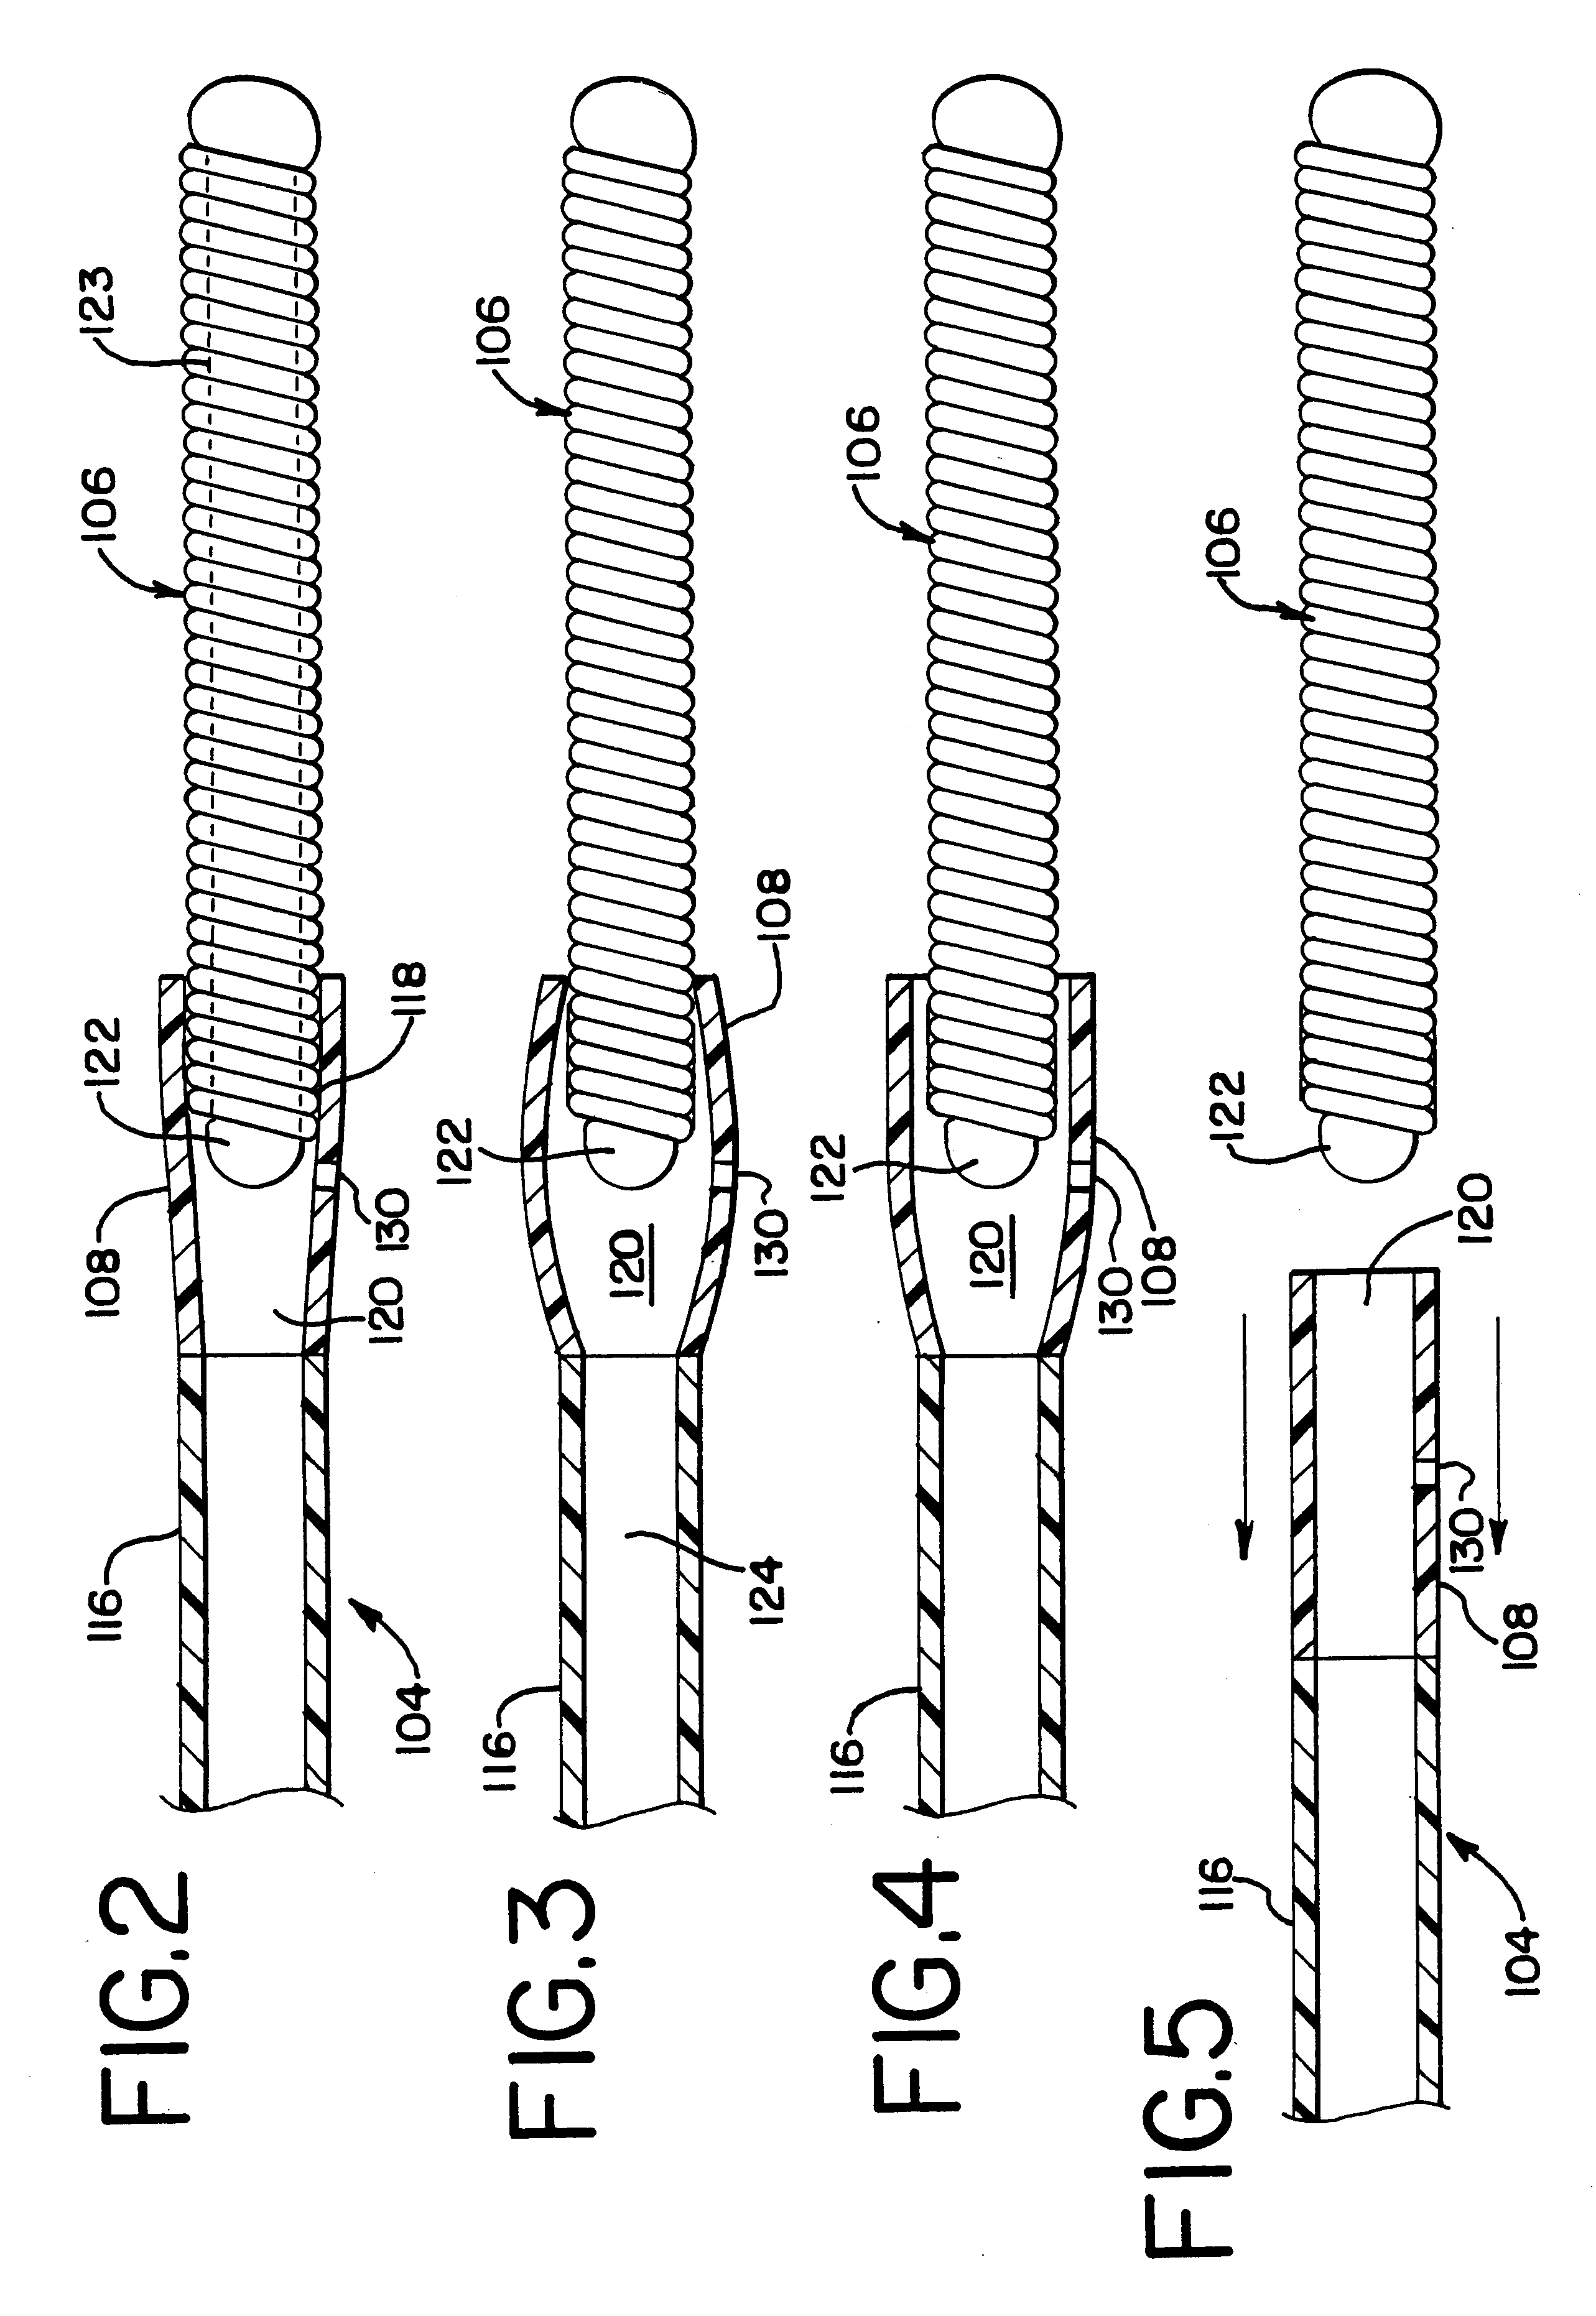 Embolic coil hydraulic deployment system with purge mechanism